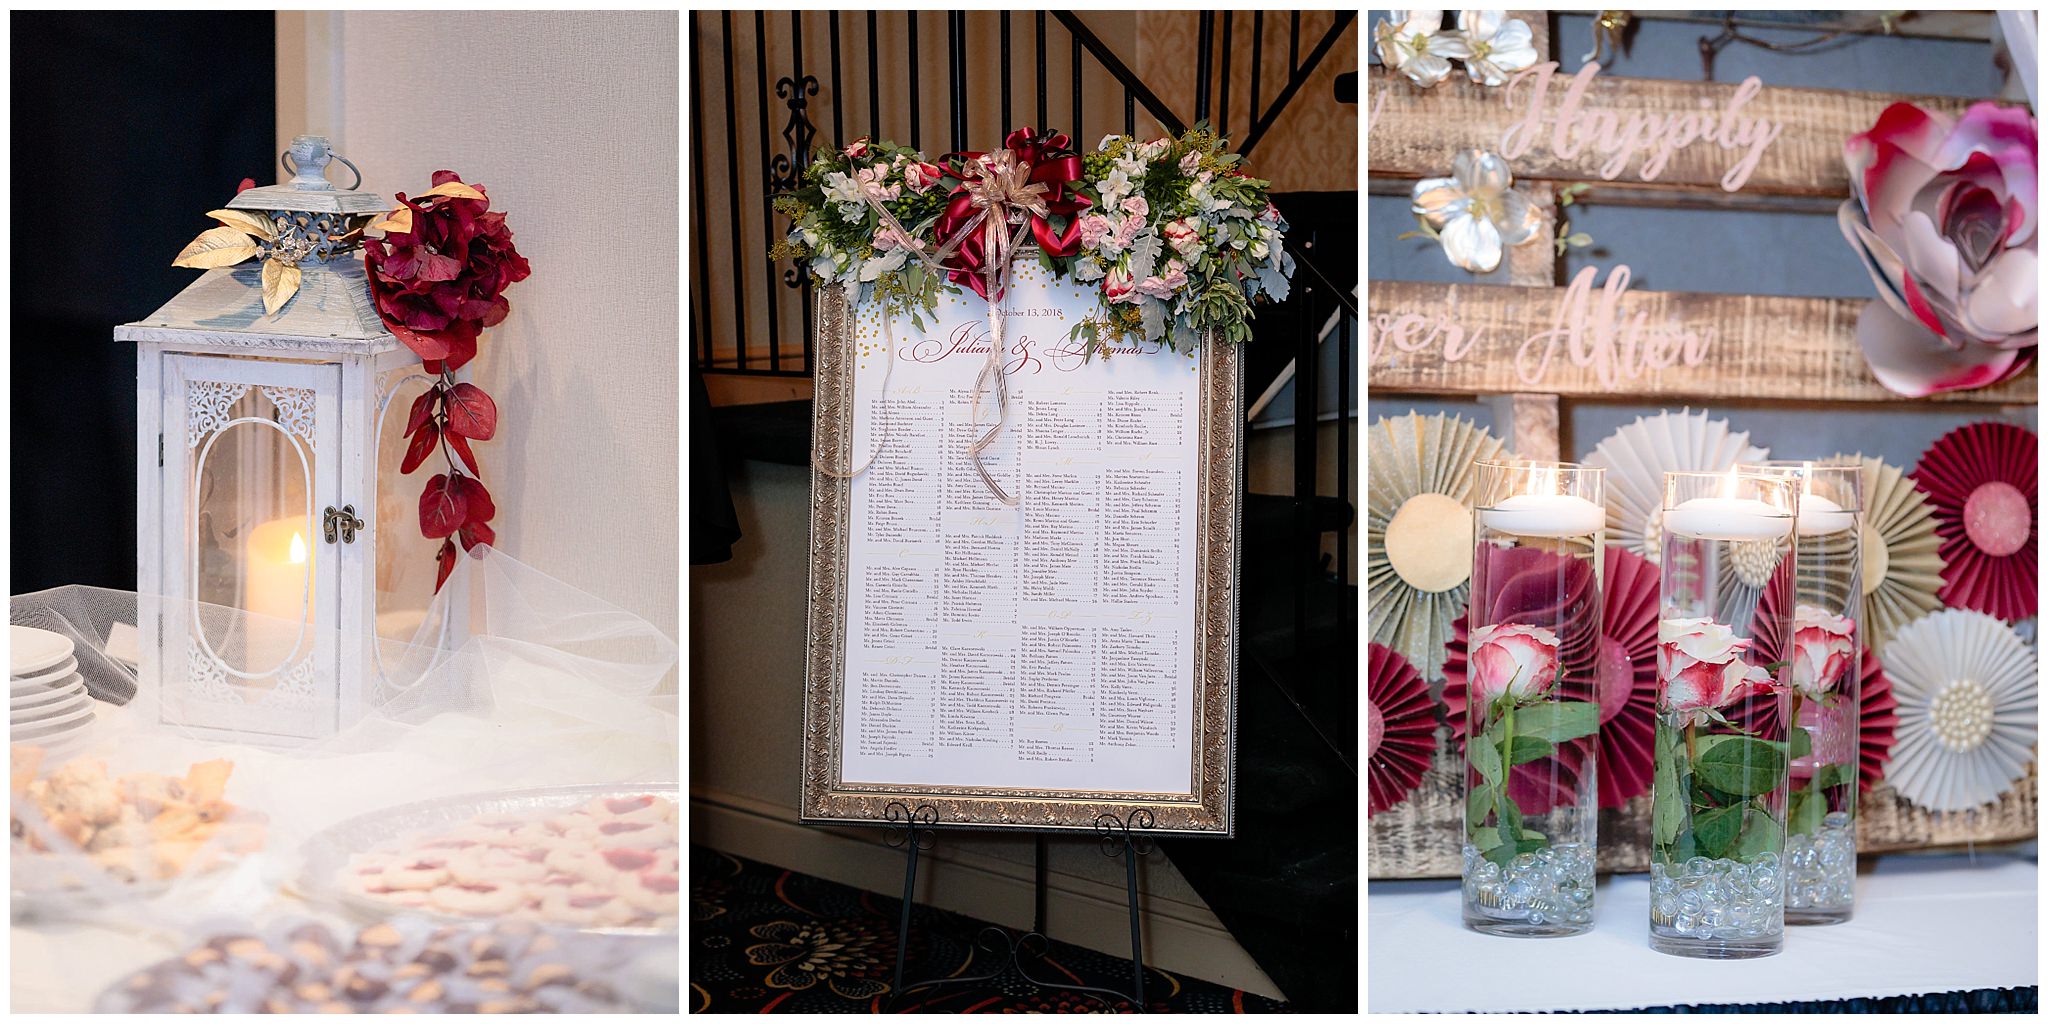 Seating chart and fall floral decor for a wedding at the Fez